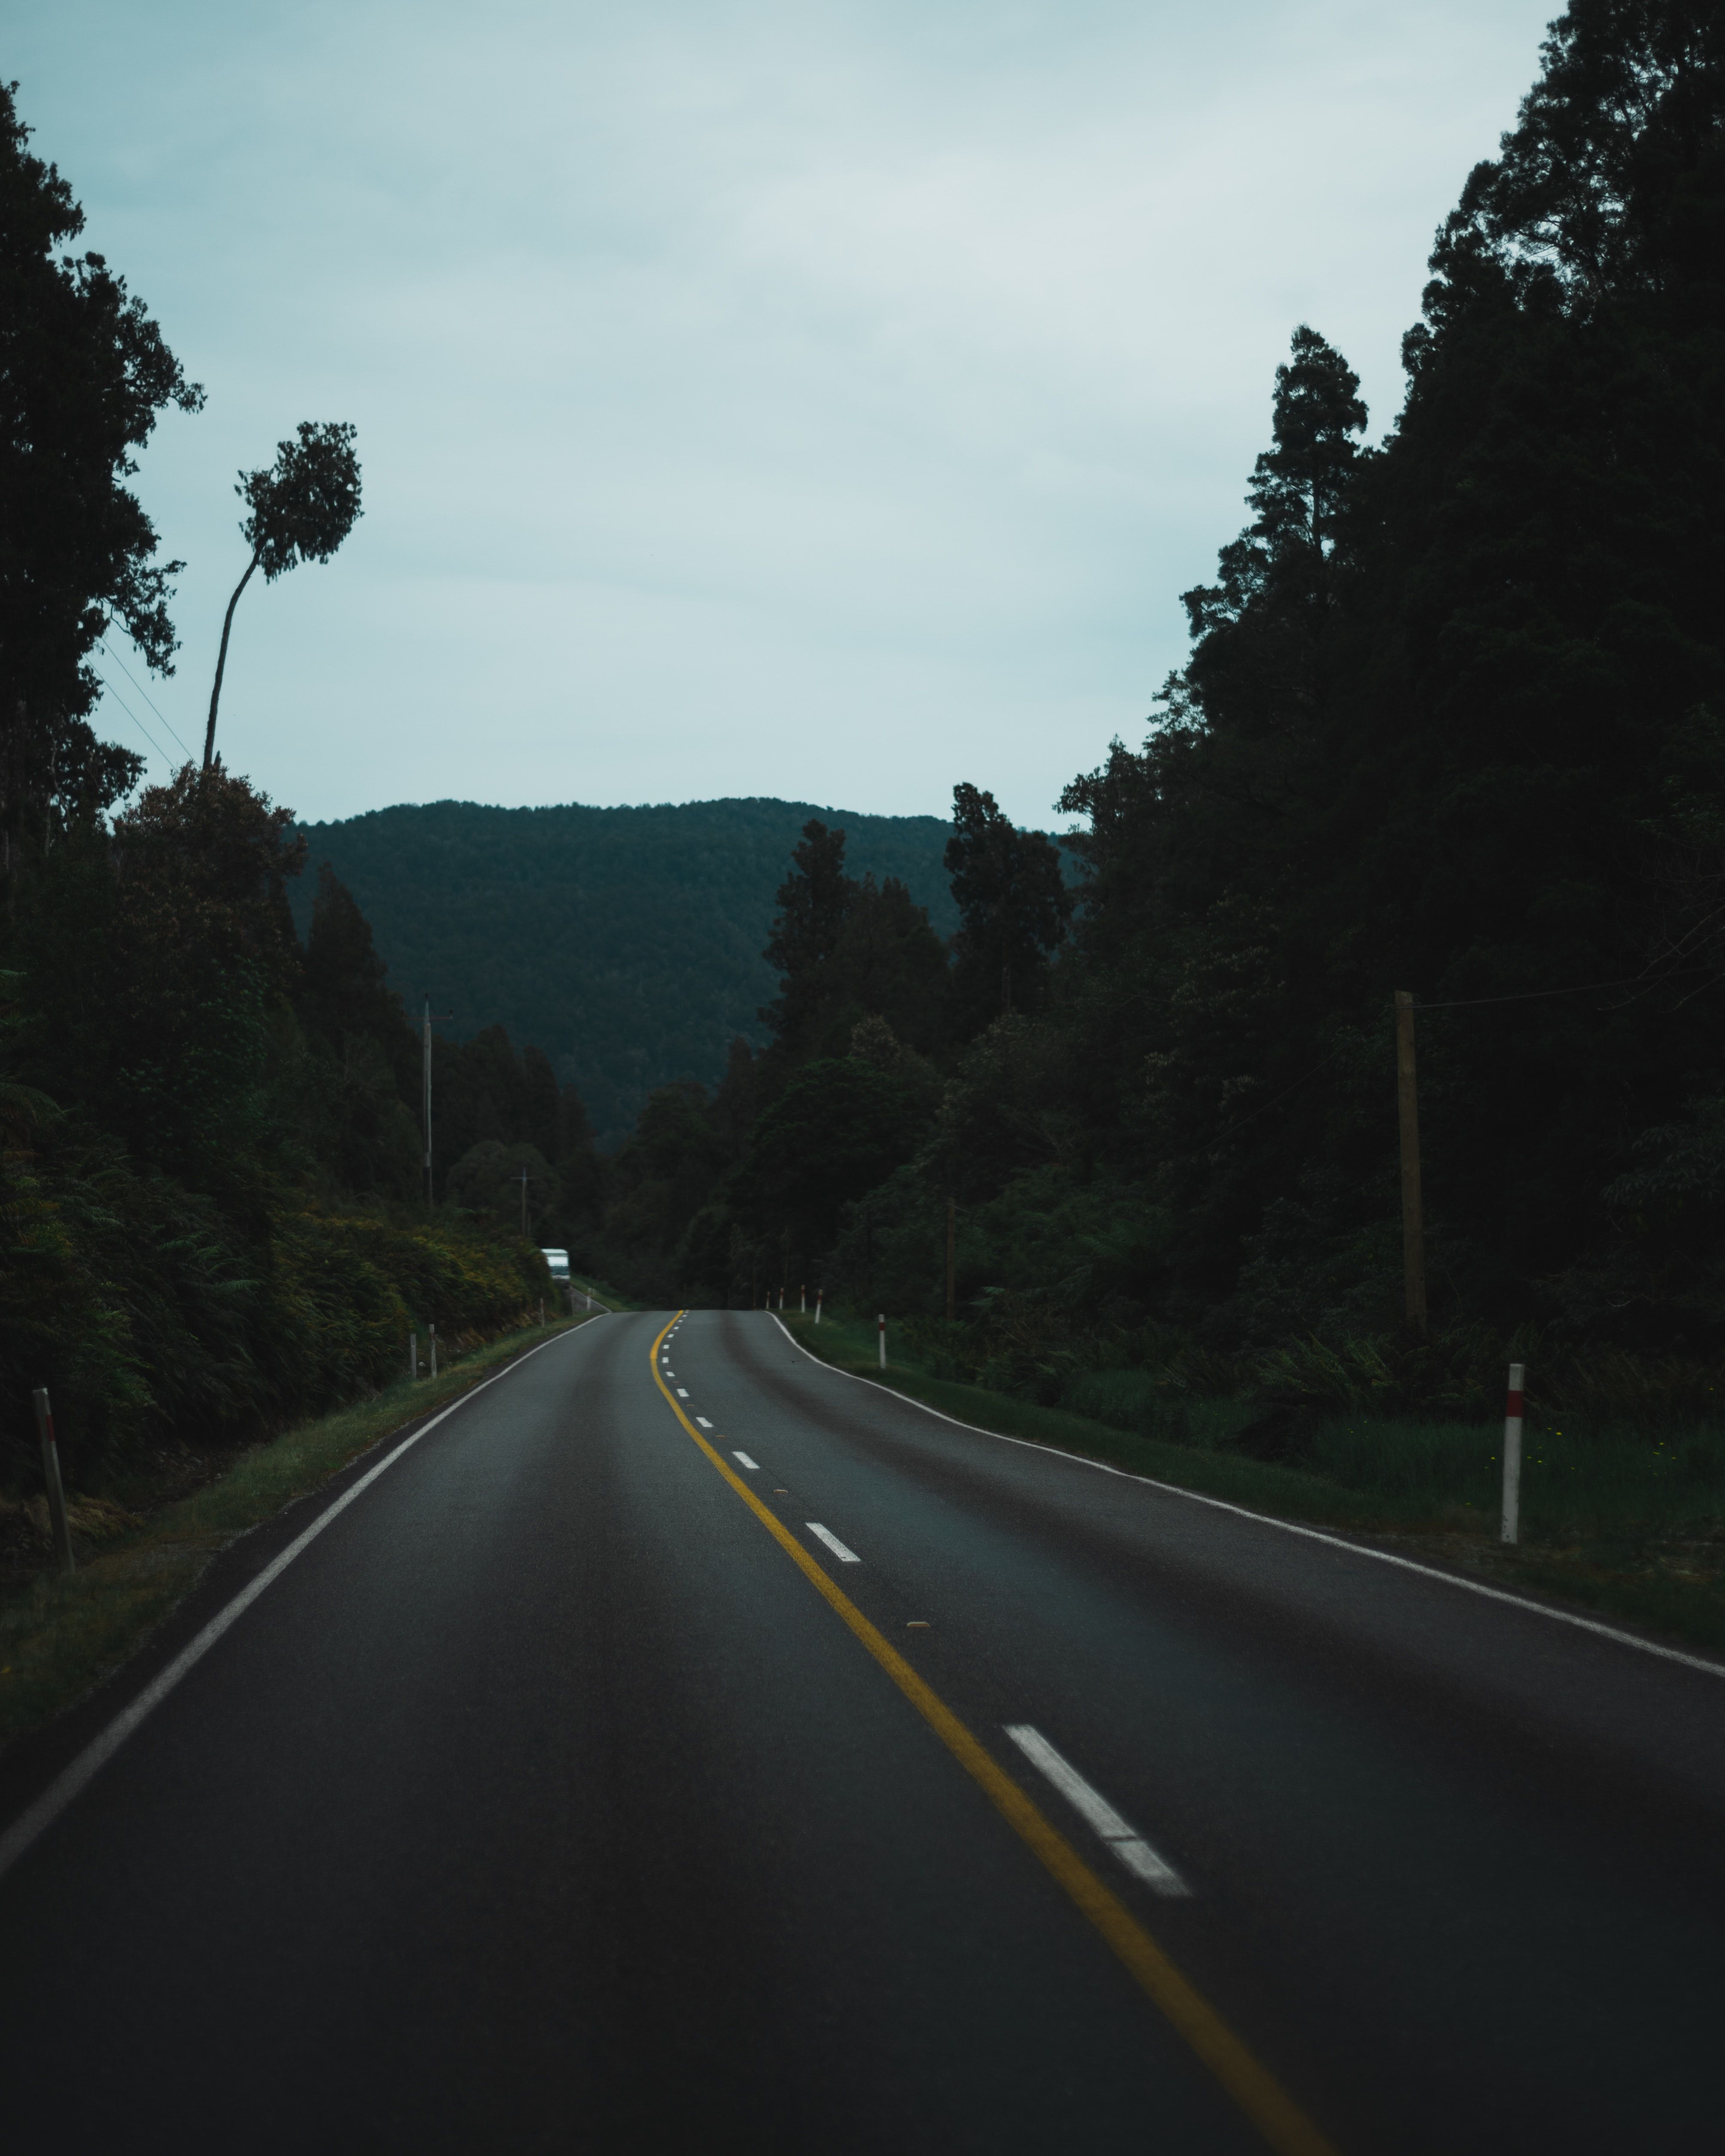 A road with trees on both sides and mountains in the distance. - Road